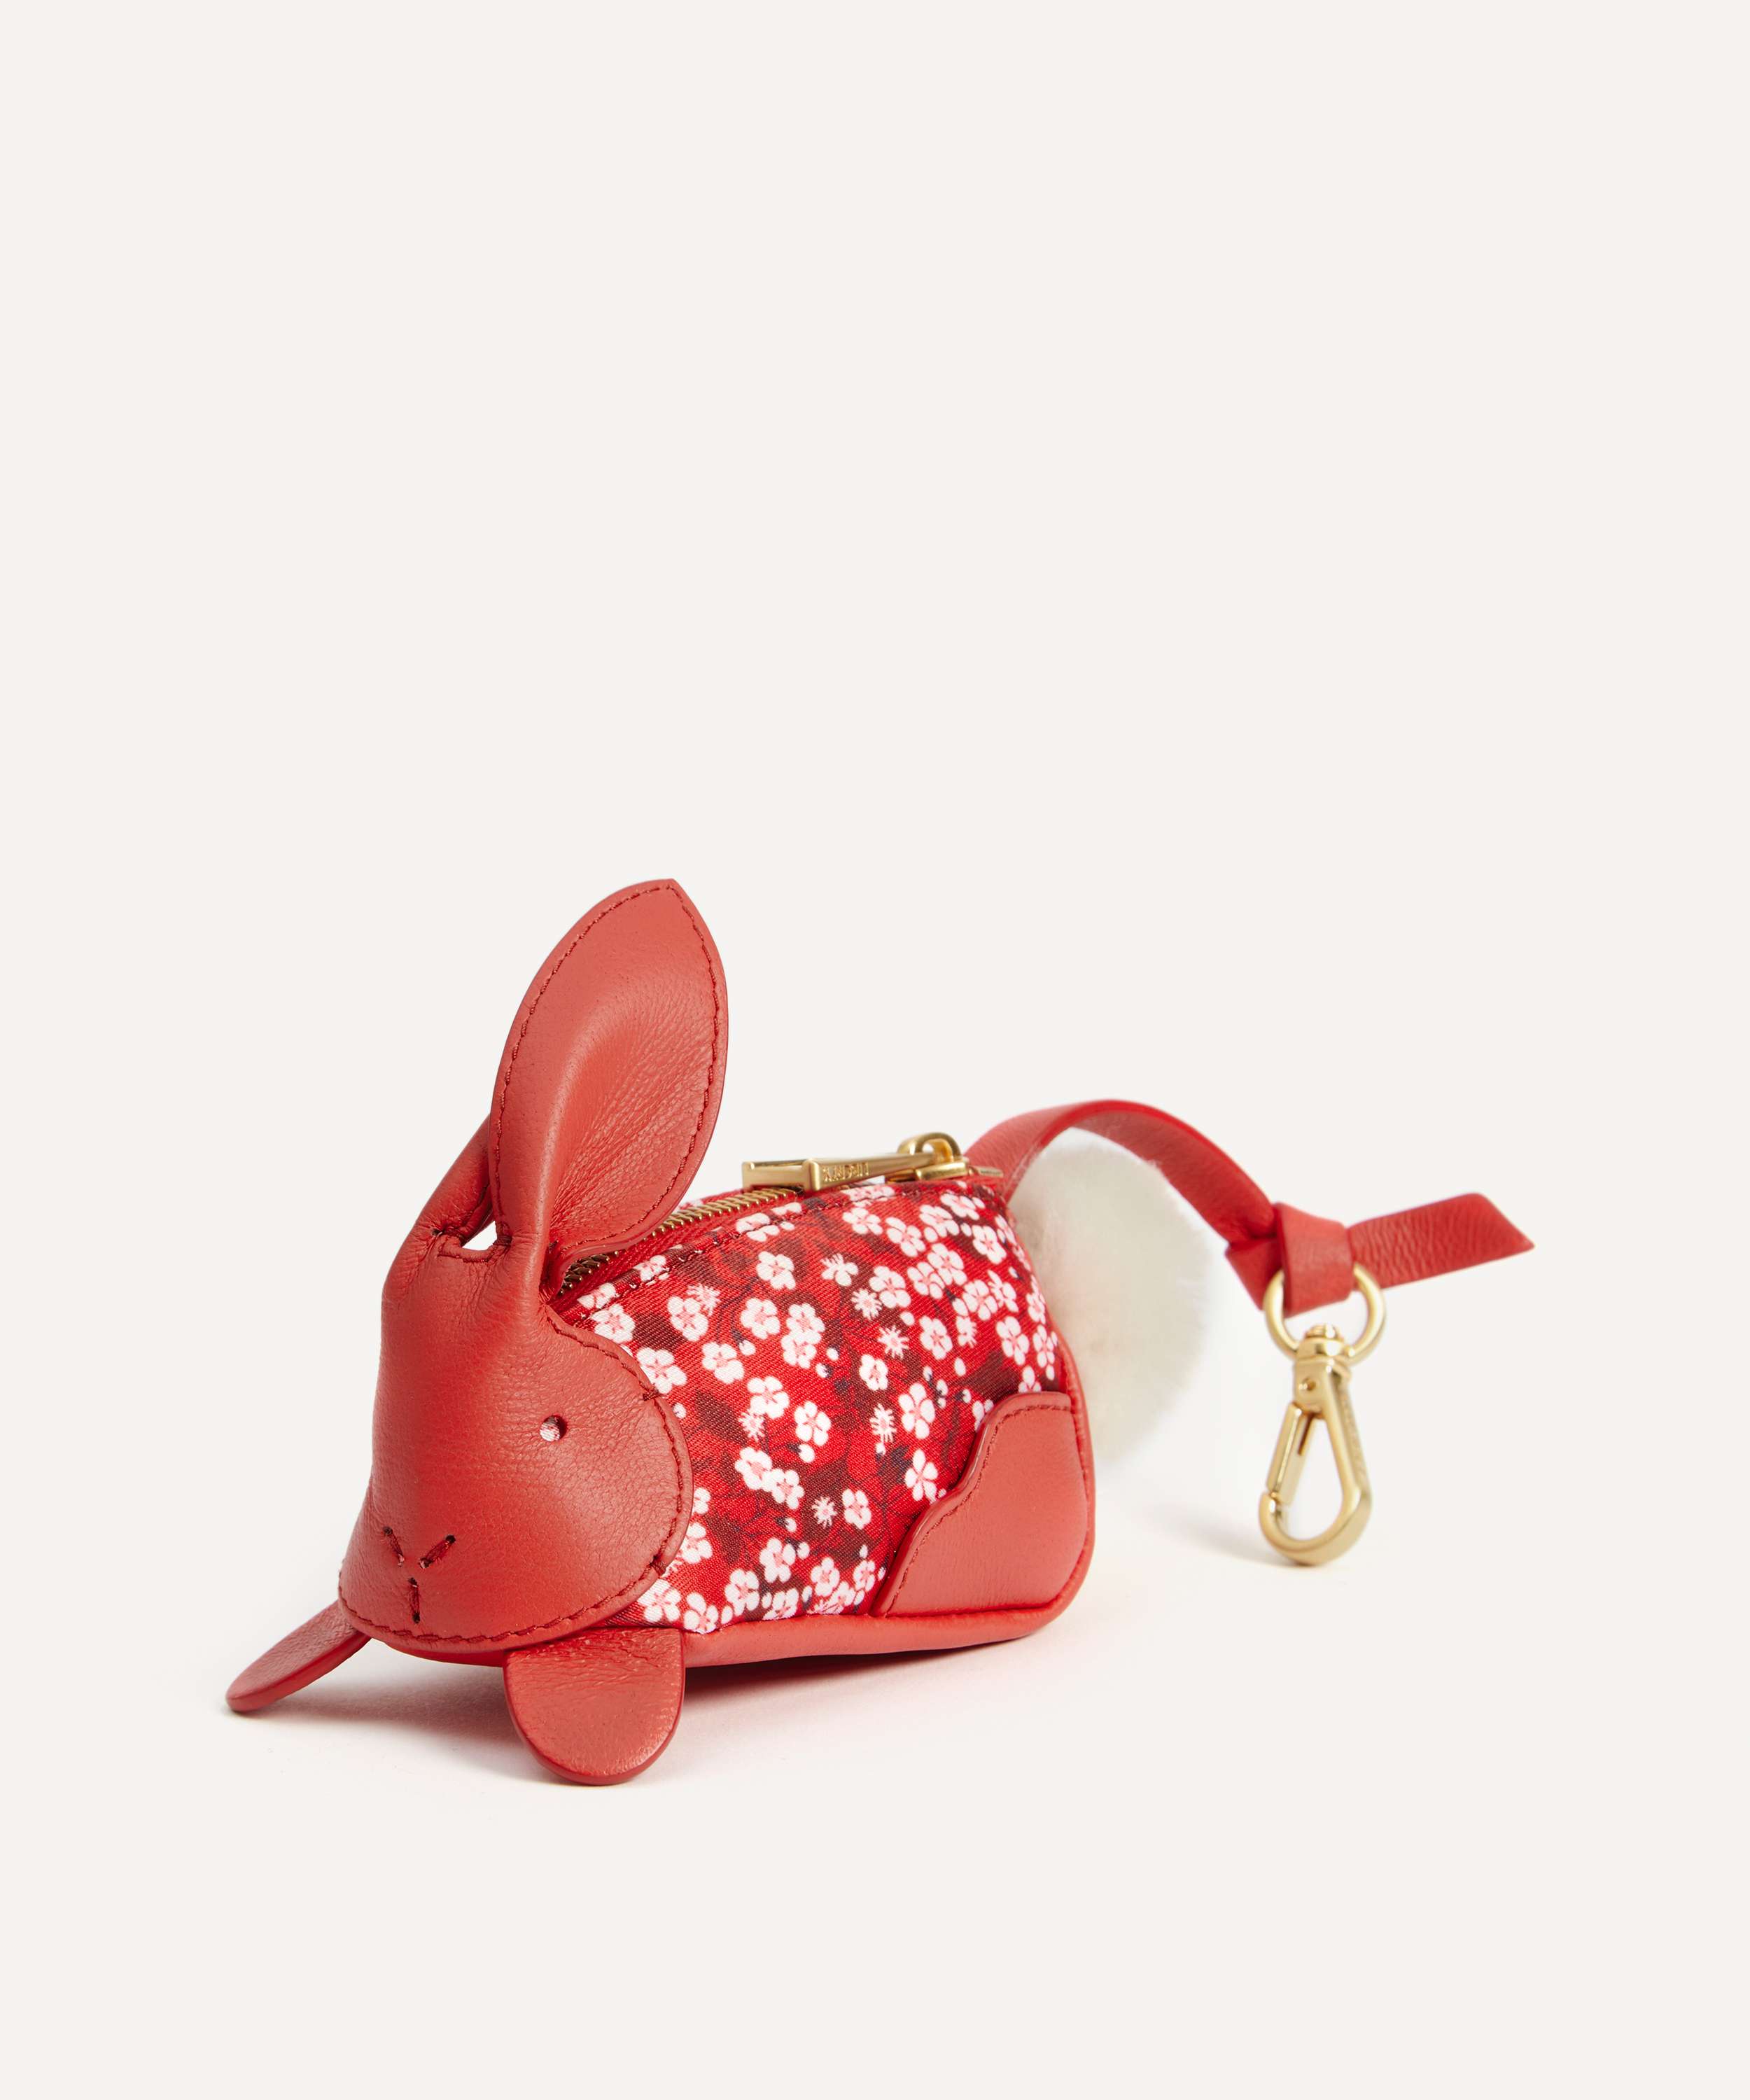 Chinese New Year 2023: Rabbit-inspired accessories to wear for